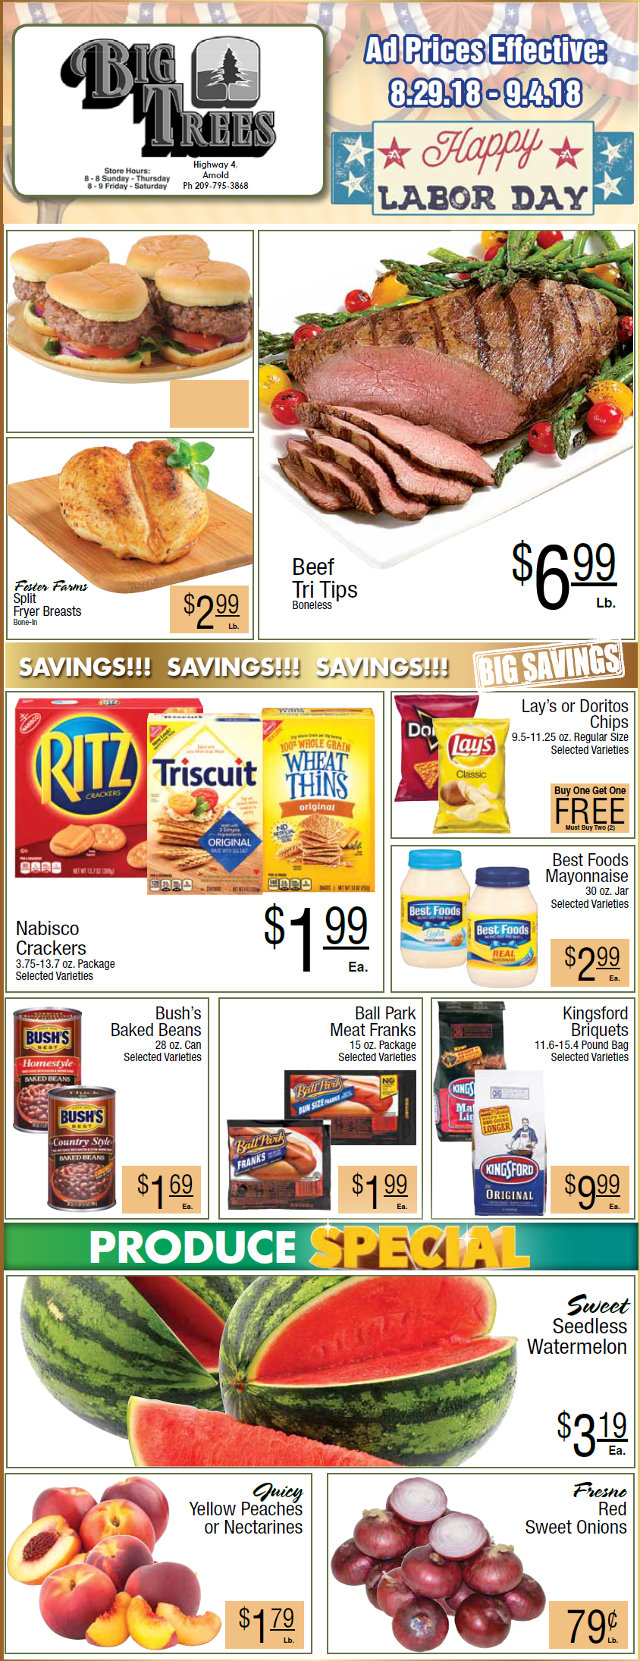 Big Trees Market Weekly Ad & Grocery Specials Through September 4th